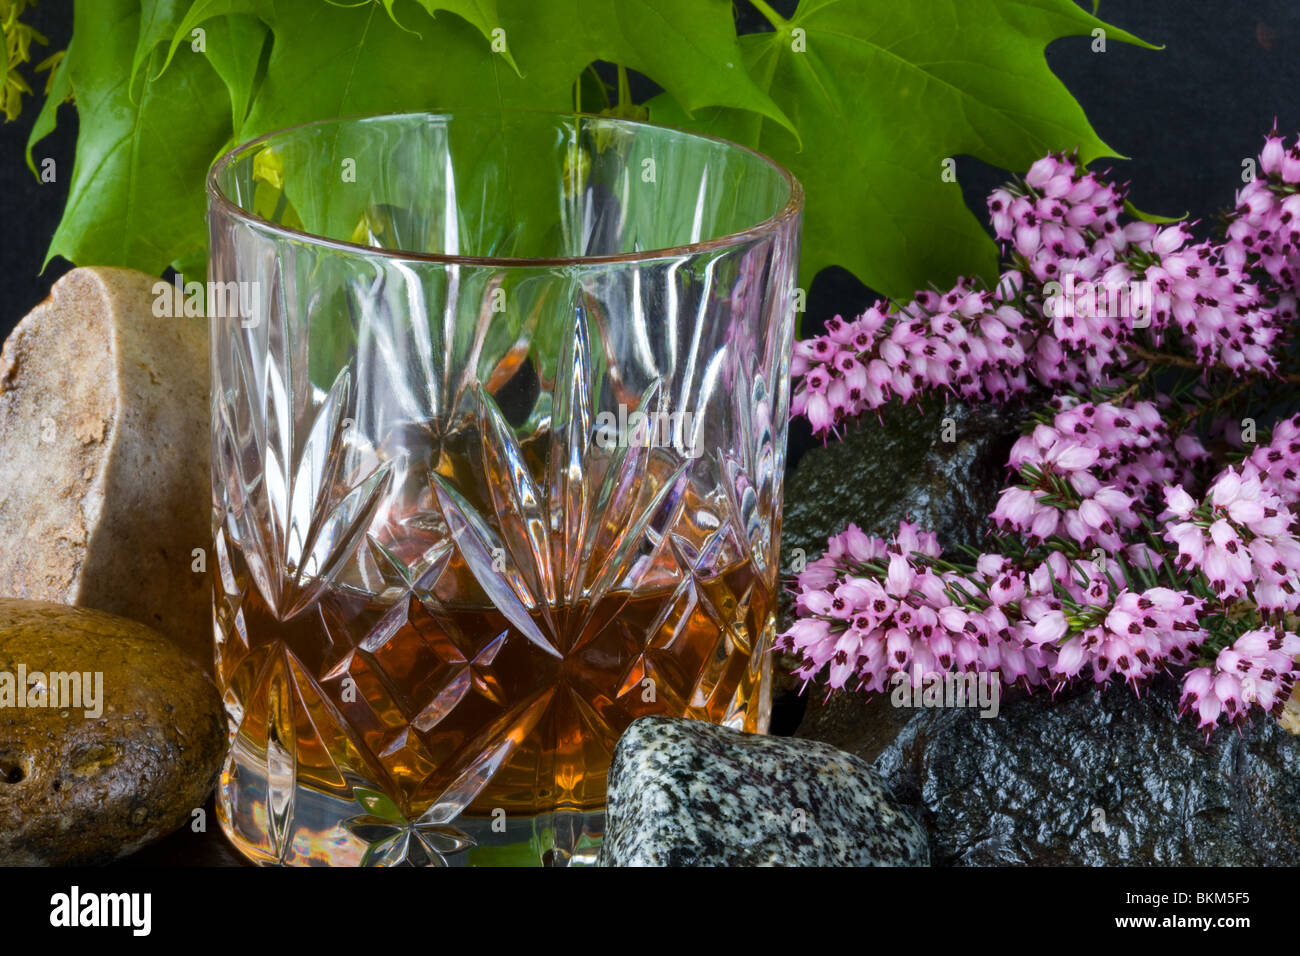 A glass of whisky on rocks with heather and leaves Stock Photo